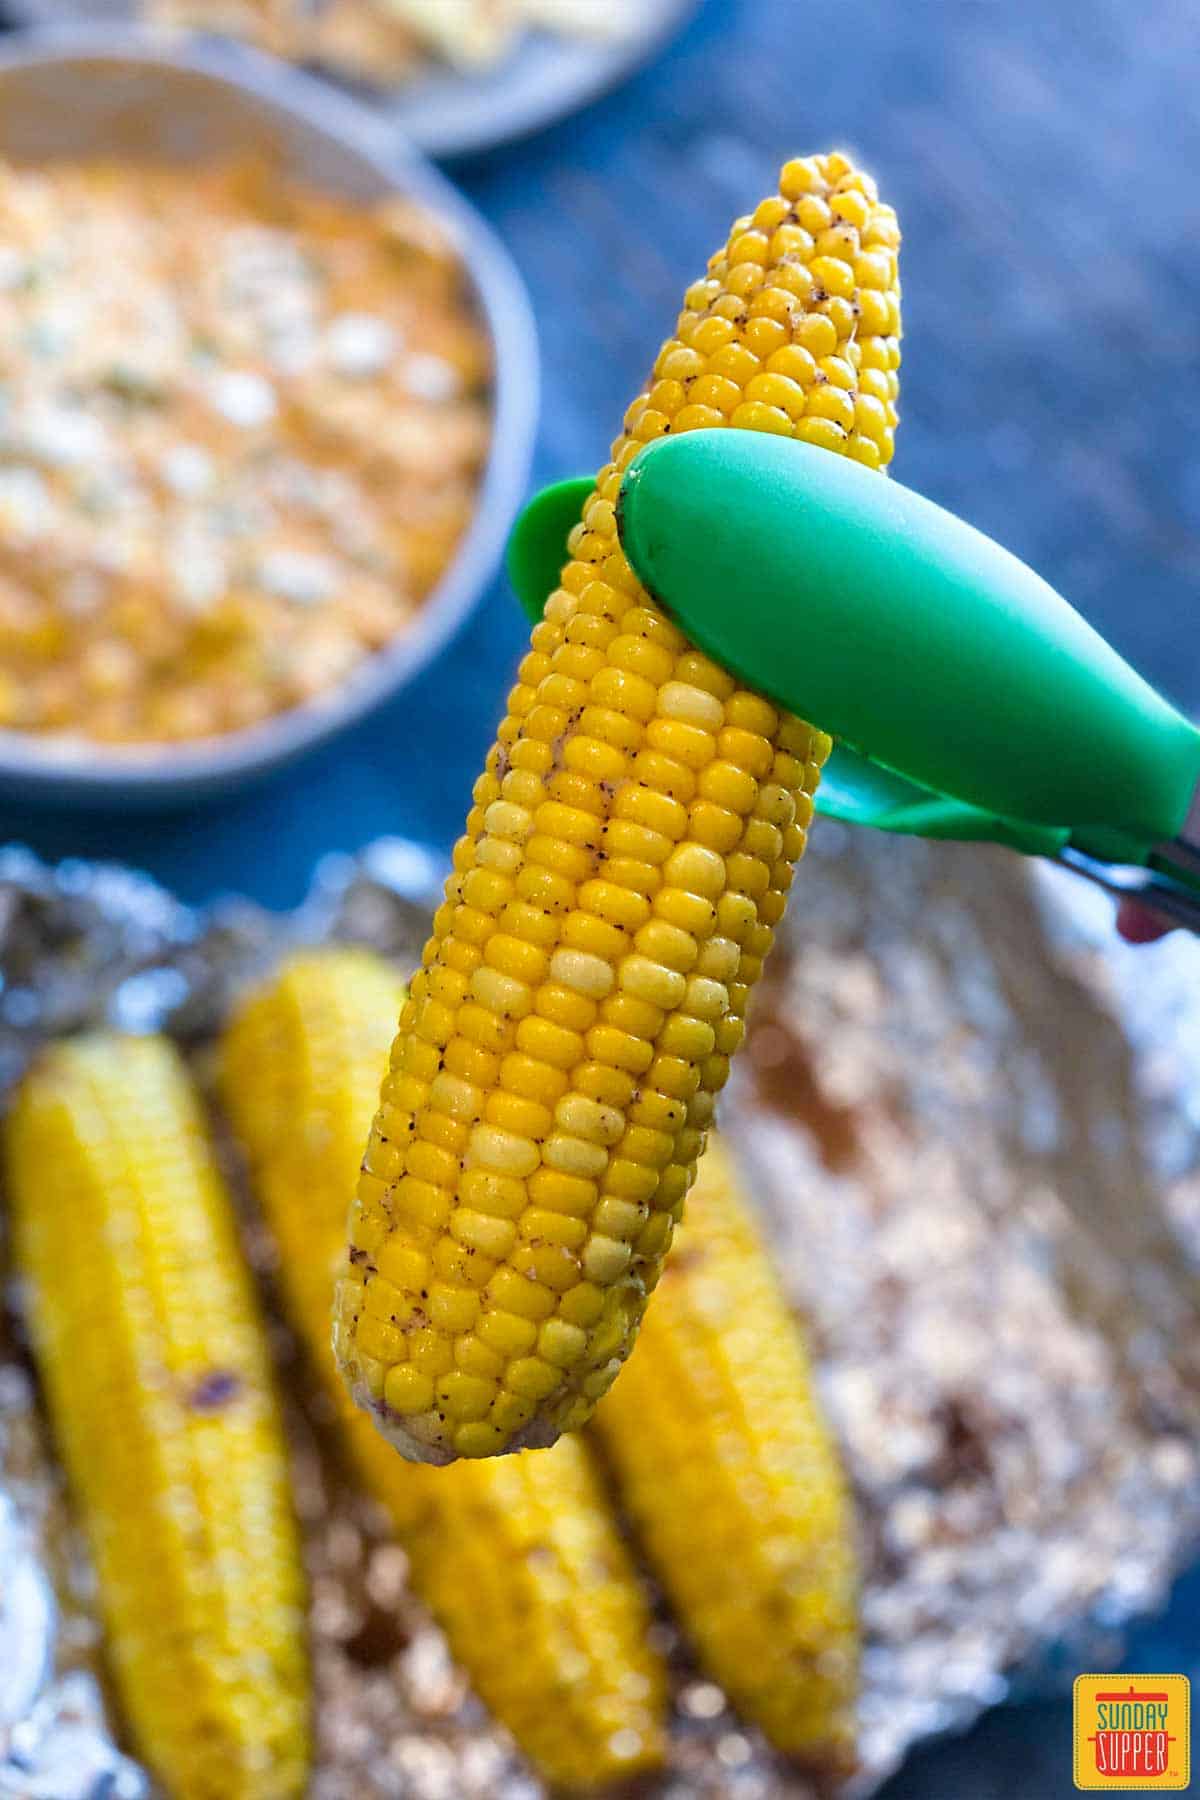 How To Grill Corn On The Cob In Foil Sunday Supper Movement,Bake Bacon In Oven 450